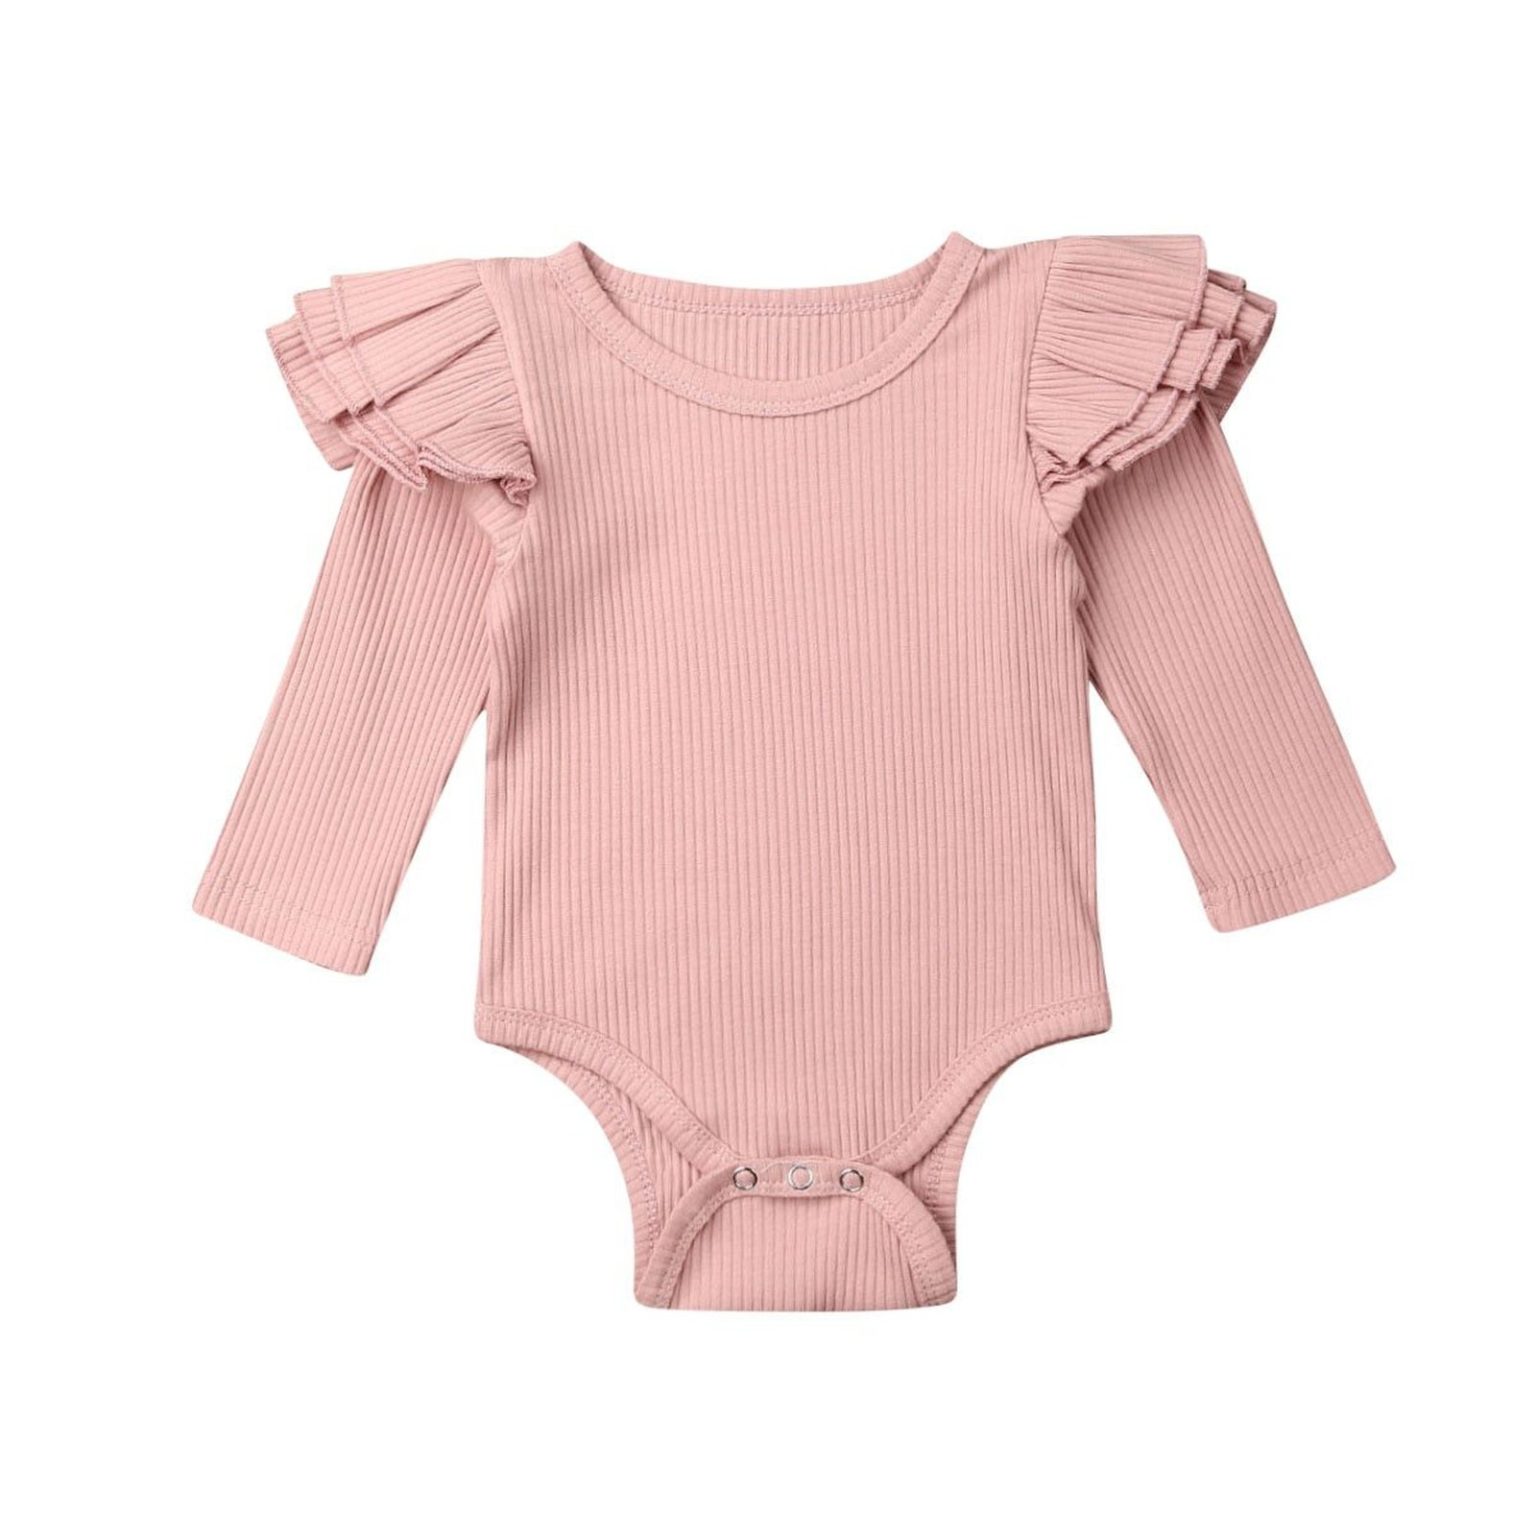 Types Of Onesies - Choose The Best For Your Baby – Lifestyle